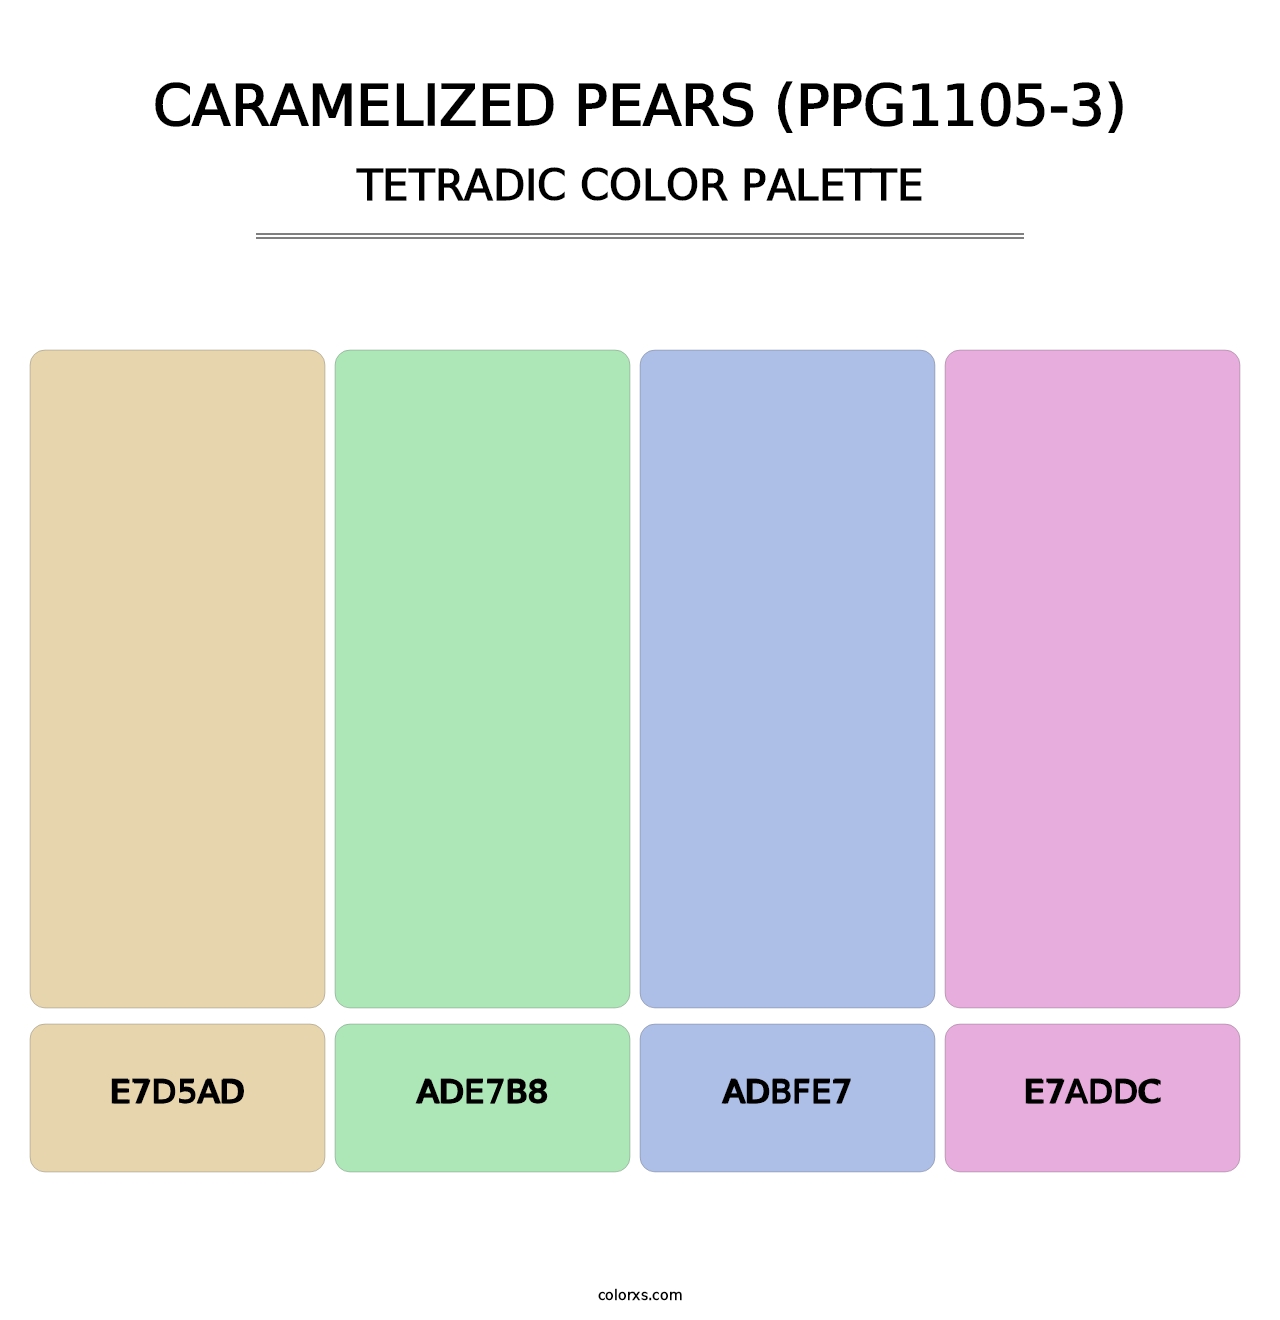 Caramelized Pears (PPG1105-3) - Tetradic Color Palette